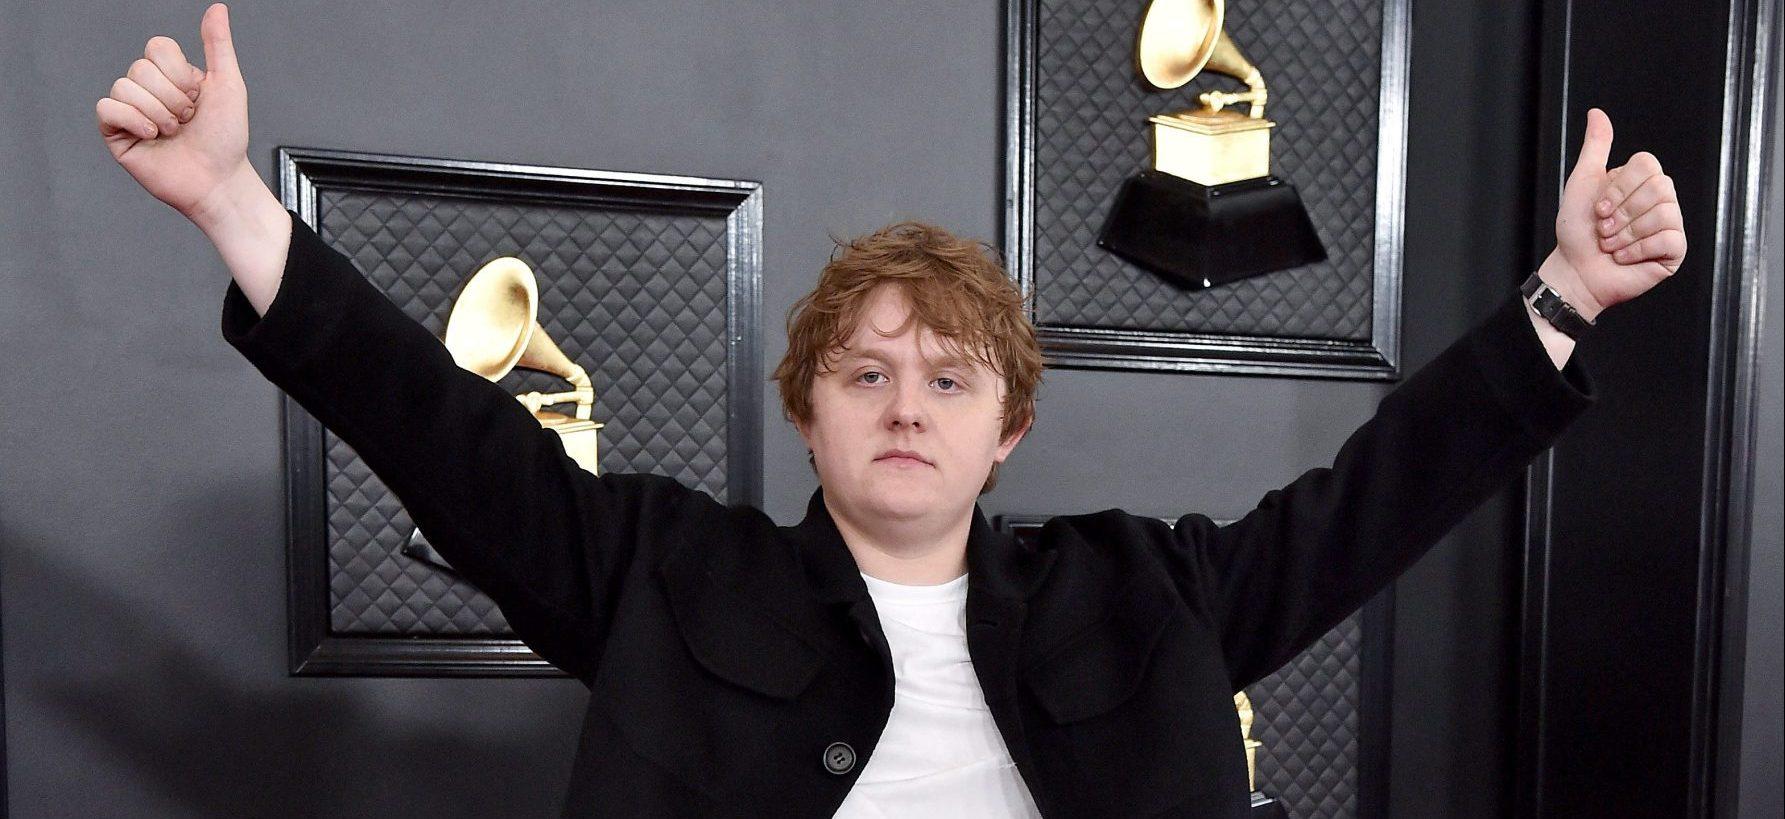 Lewis Capaldi Reveals He Will Quit Music If His Tourette Syndrome Gets Any Worse